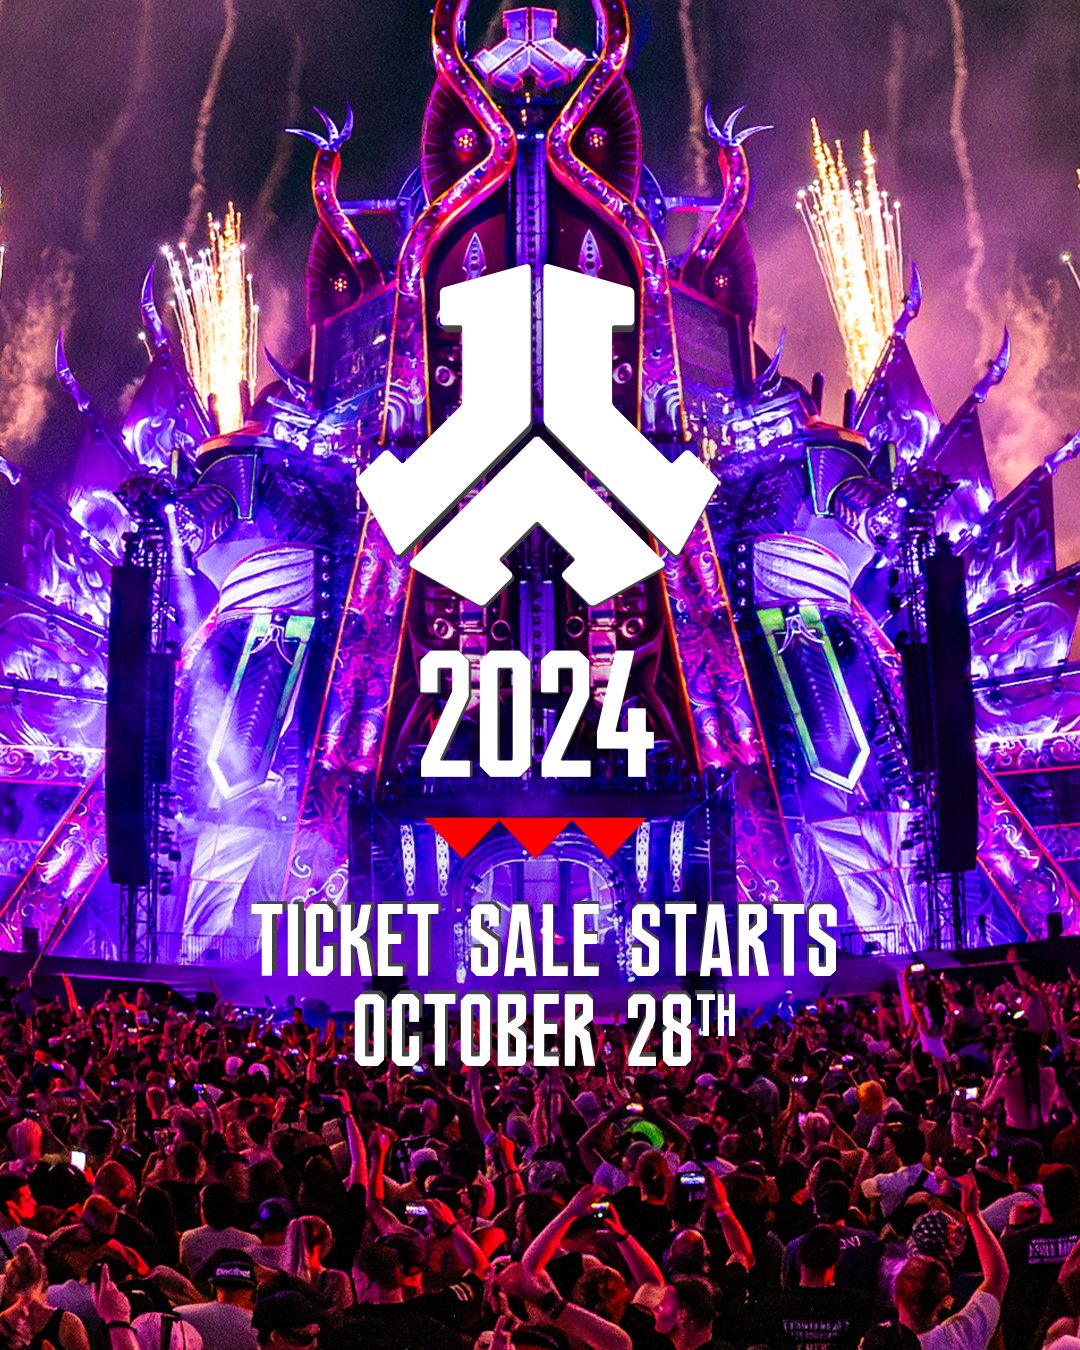 Qdance on Twitter "Warriors, mark your calendars! The Defqon.1 2024